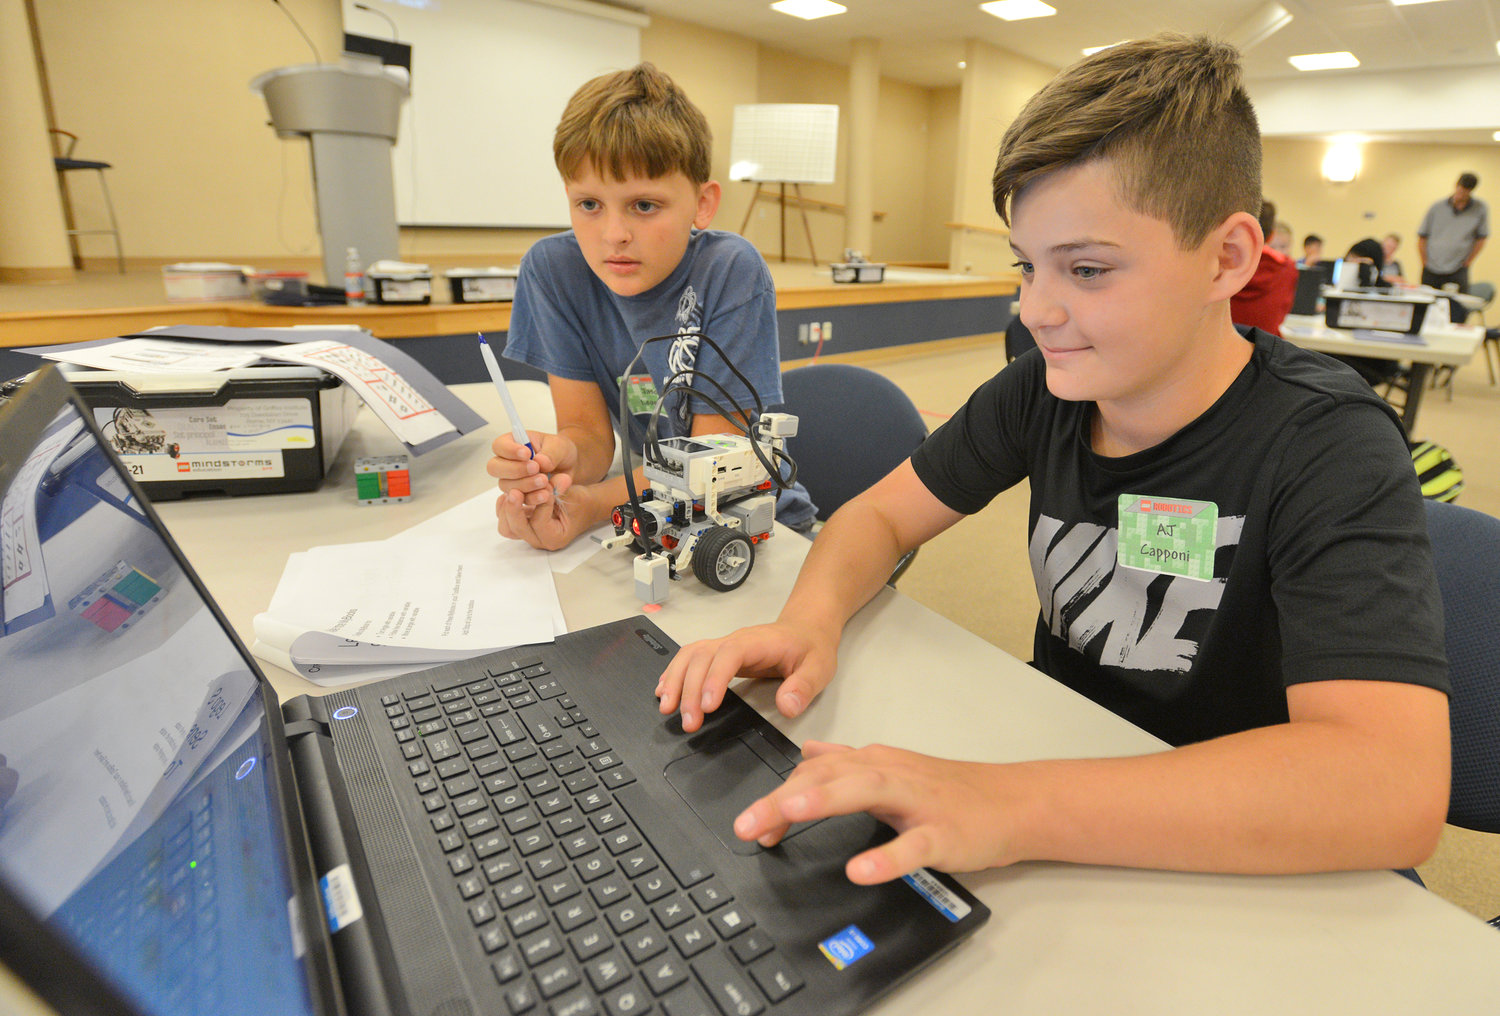 SETTING UP THEIR ROBOT — Clinton Elementary School students Jason Leonard and AJ Capponi work on programming their Lego robot at a STEM Outreach Program camp Wednesday at Griffiss Institute.